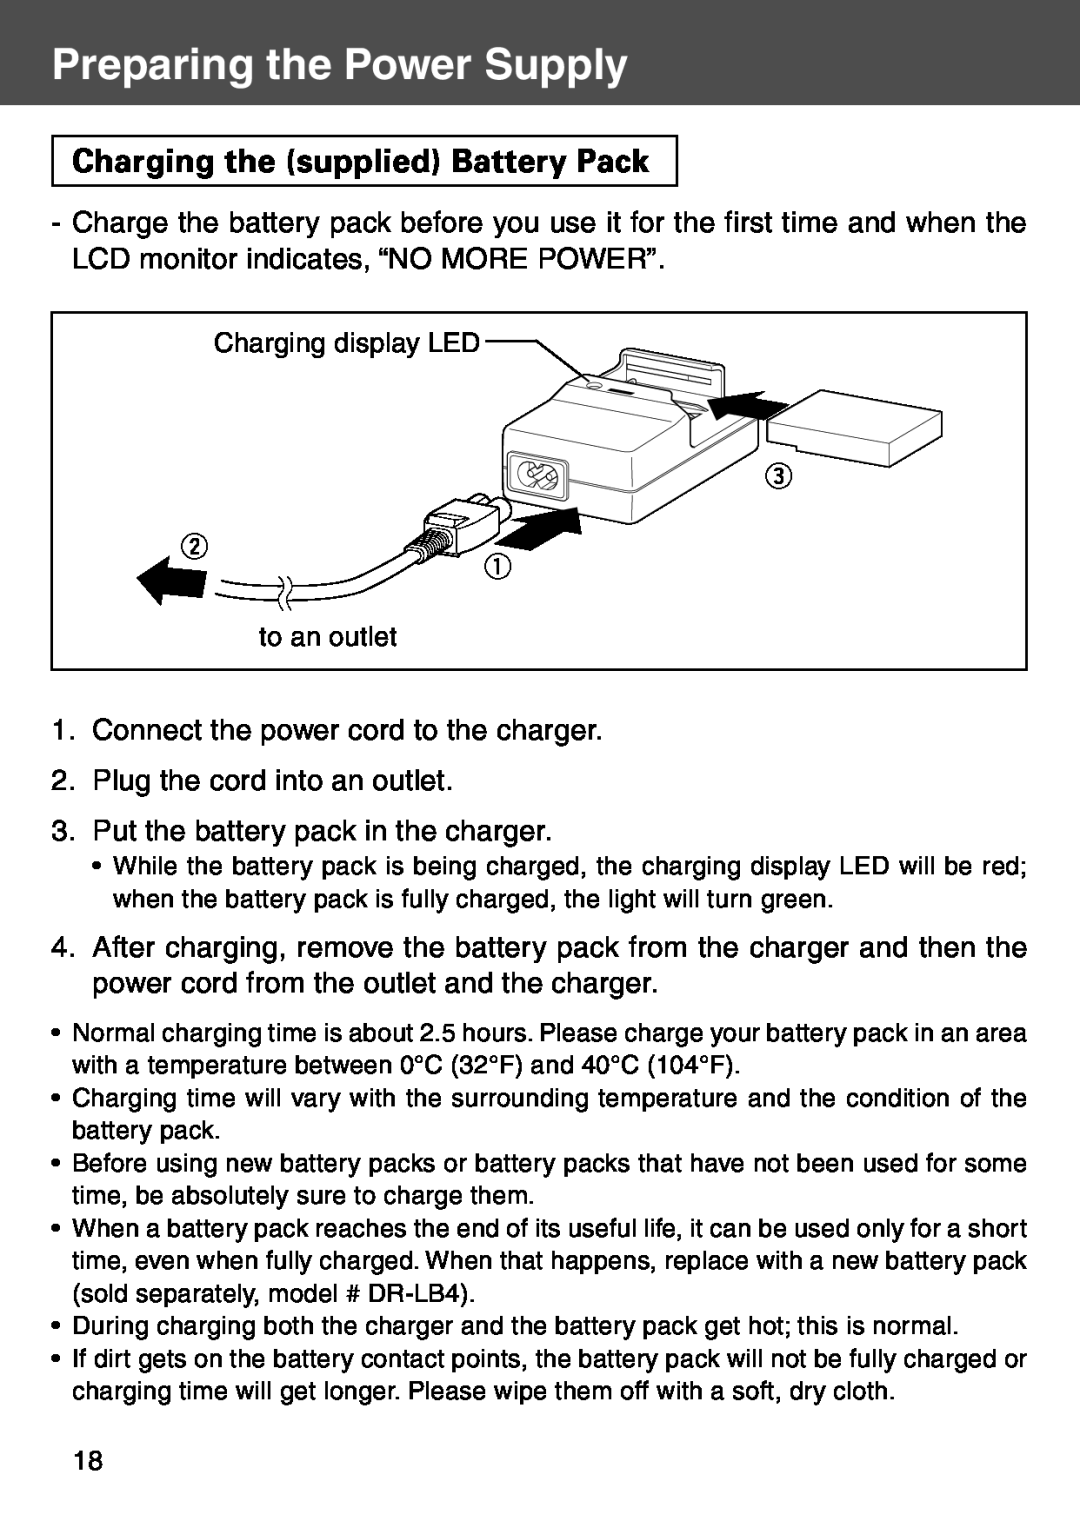 Konica Minolta KD-500Z user manual Preparing the Power Supply, Charging the supplied Battery Pack 